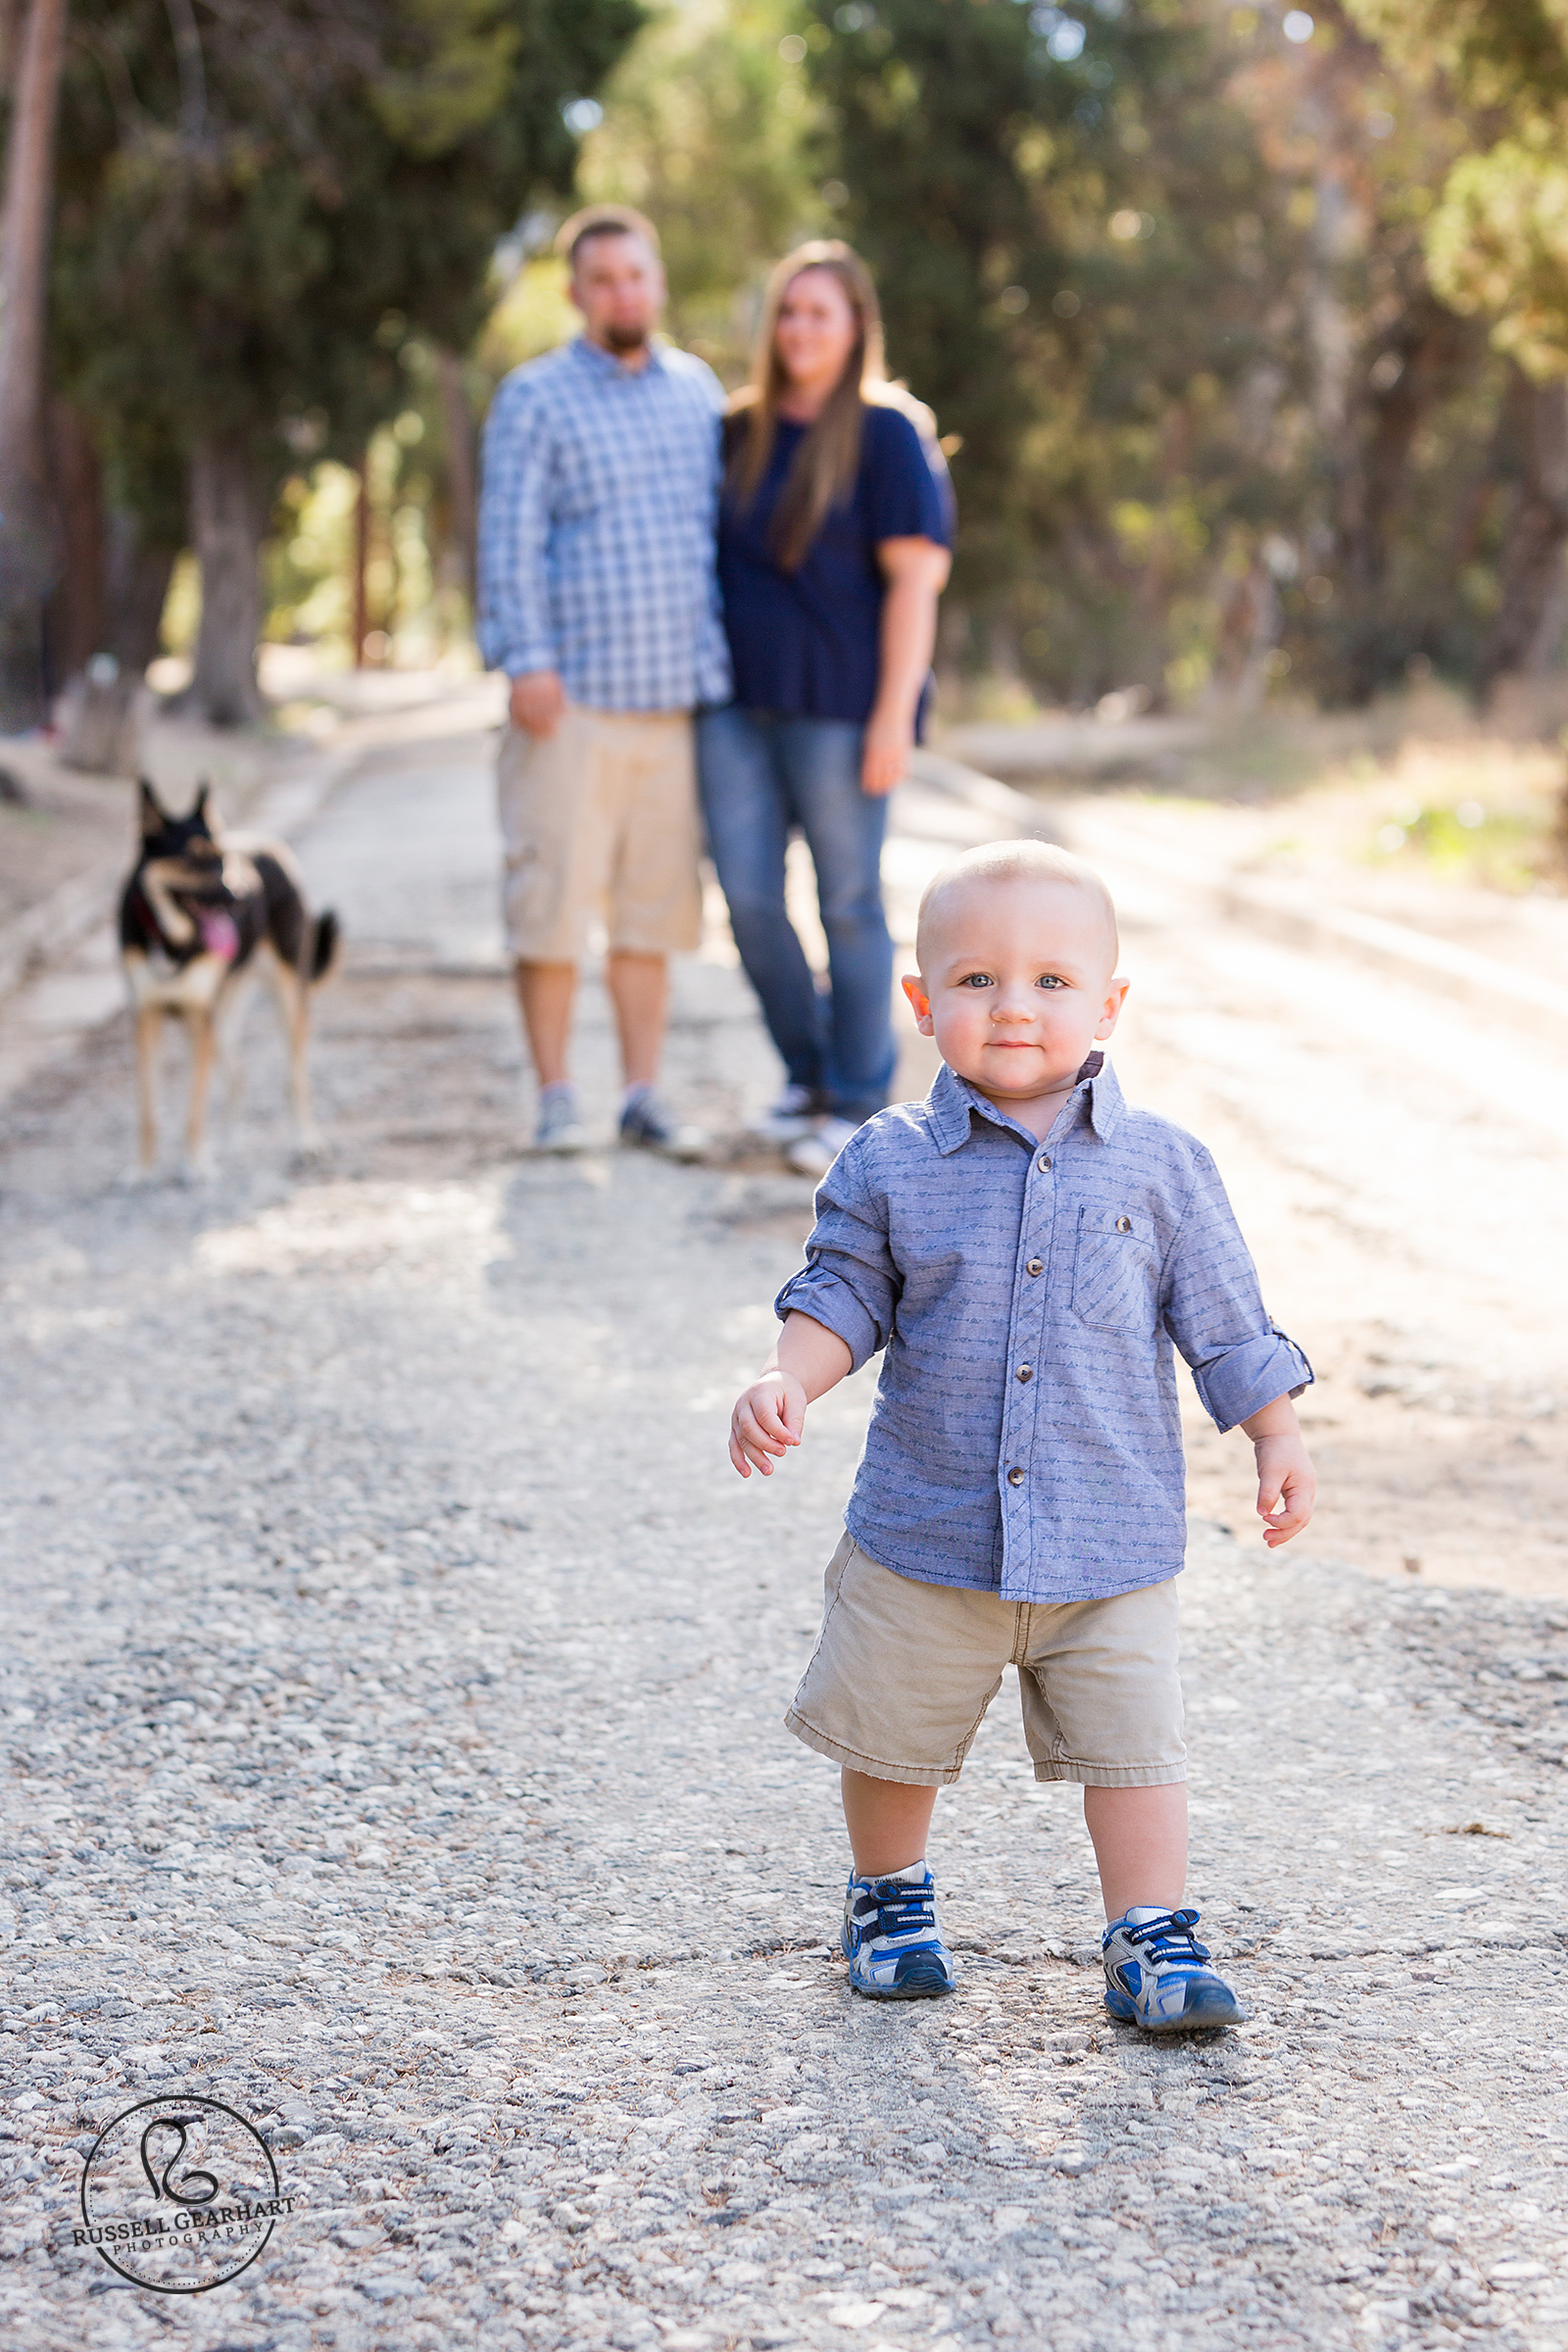 Outdoor Family Portraits in Pasadena – Russell Gearhart Photography – www.gearhartphoto.com